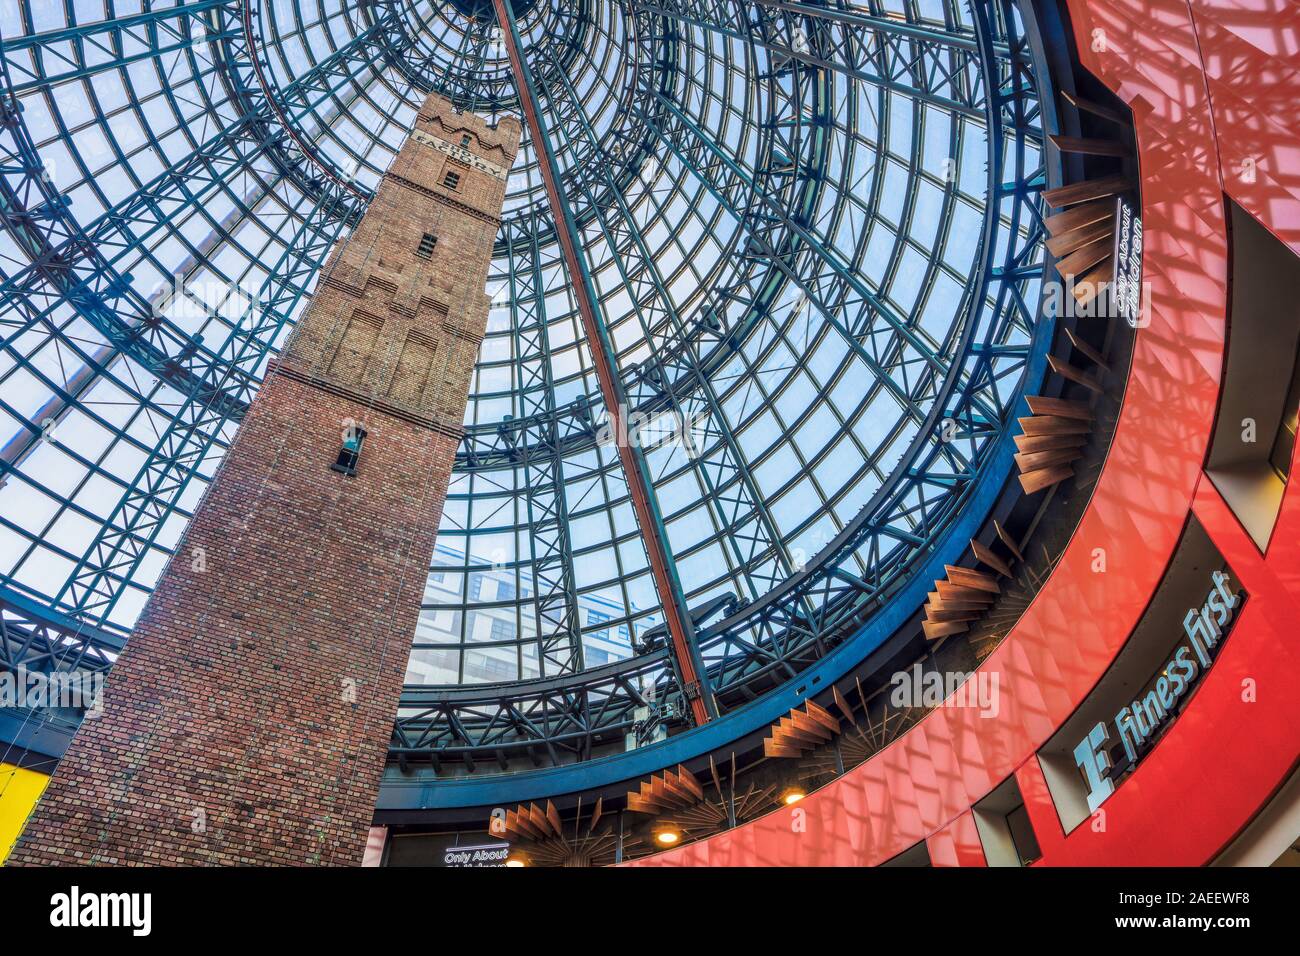 The Shot Tower at Melbourne Central Station, Melbourne, Australia. Stock Photo